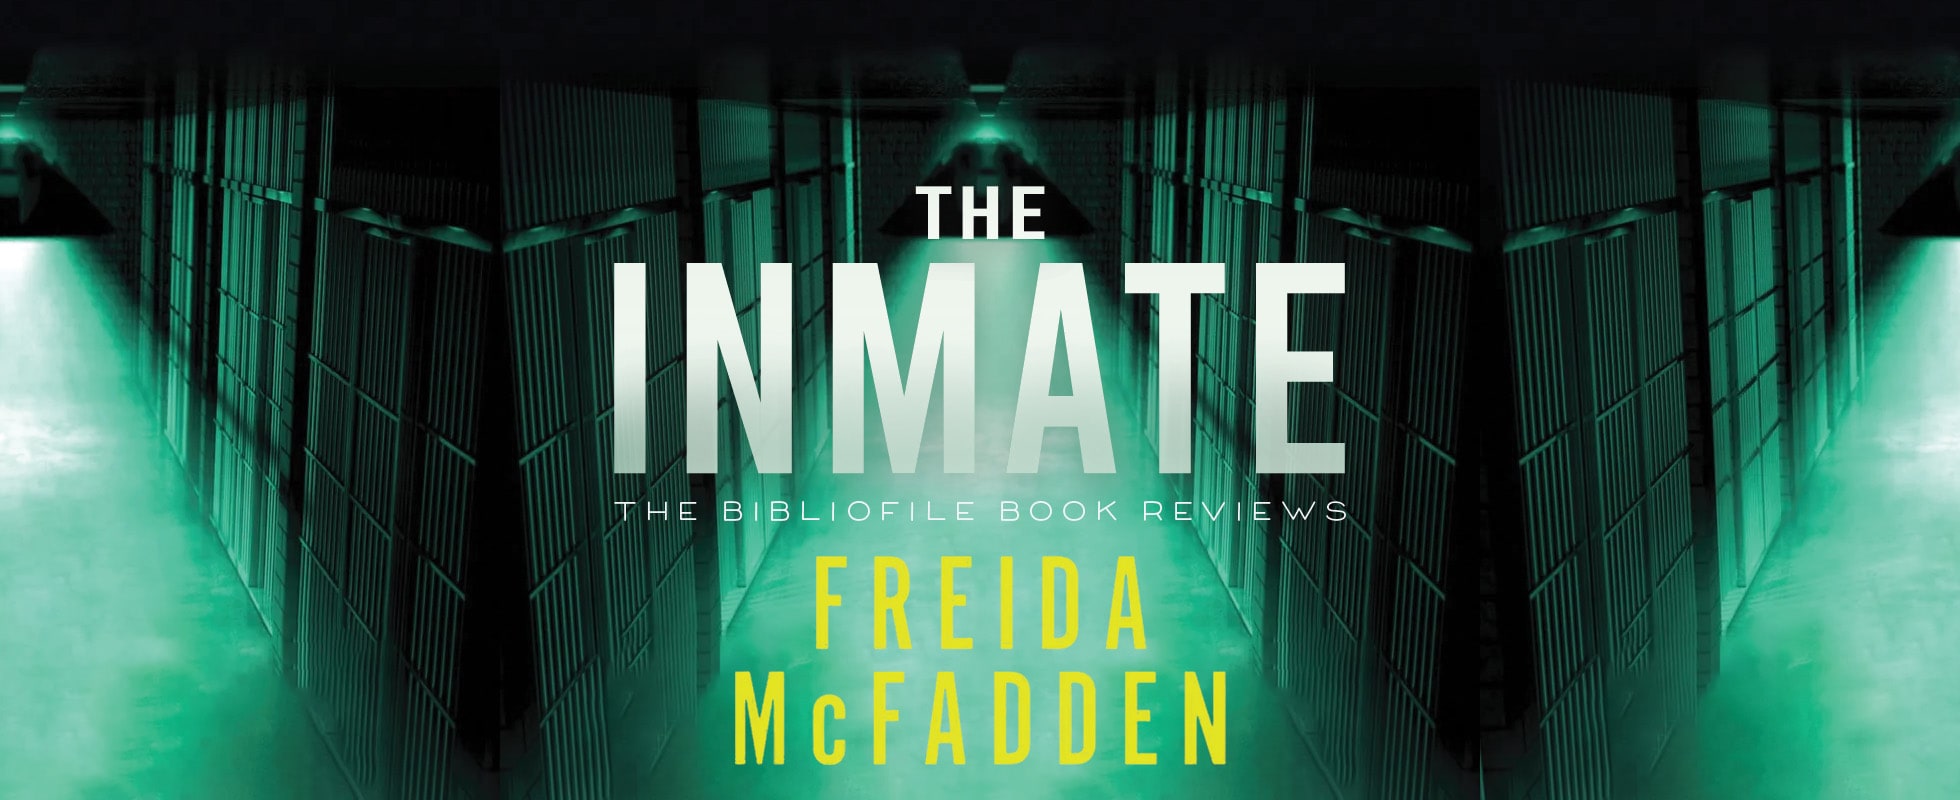 the inmate by freida mcfadden book review plot summary synopsis recap discussion spoilers